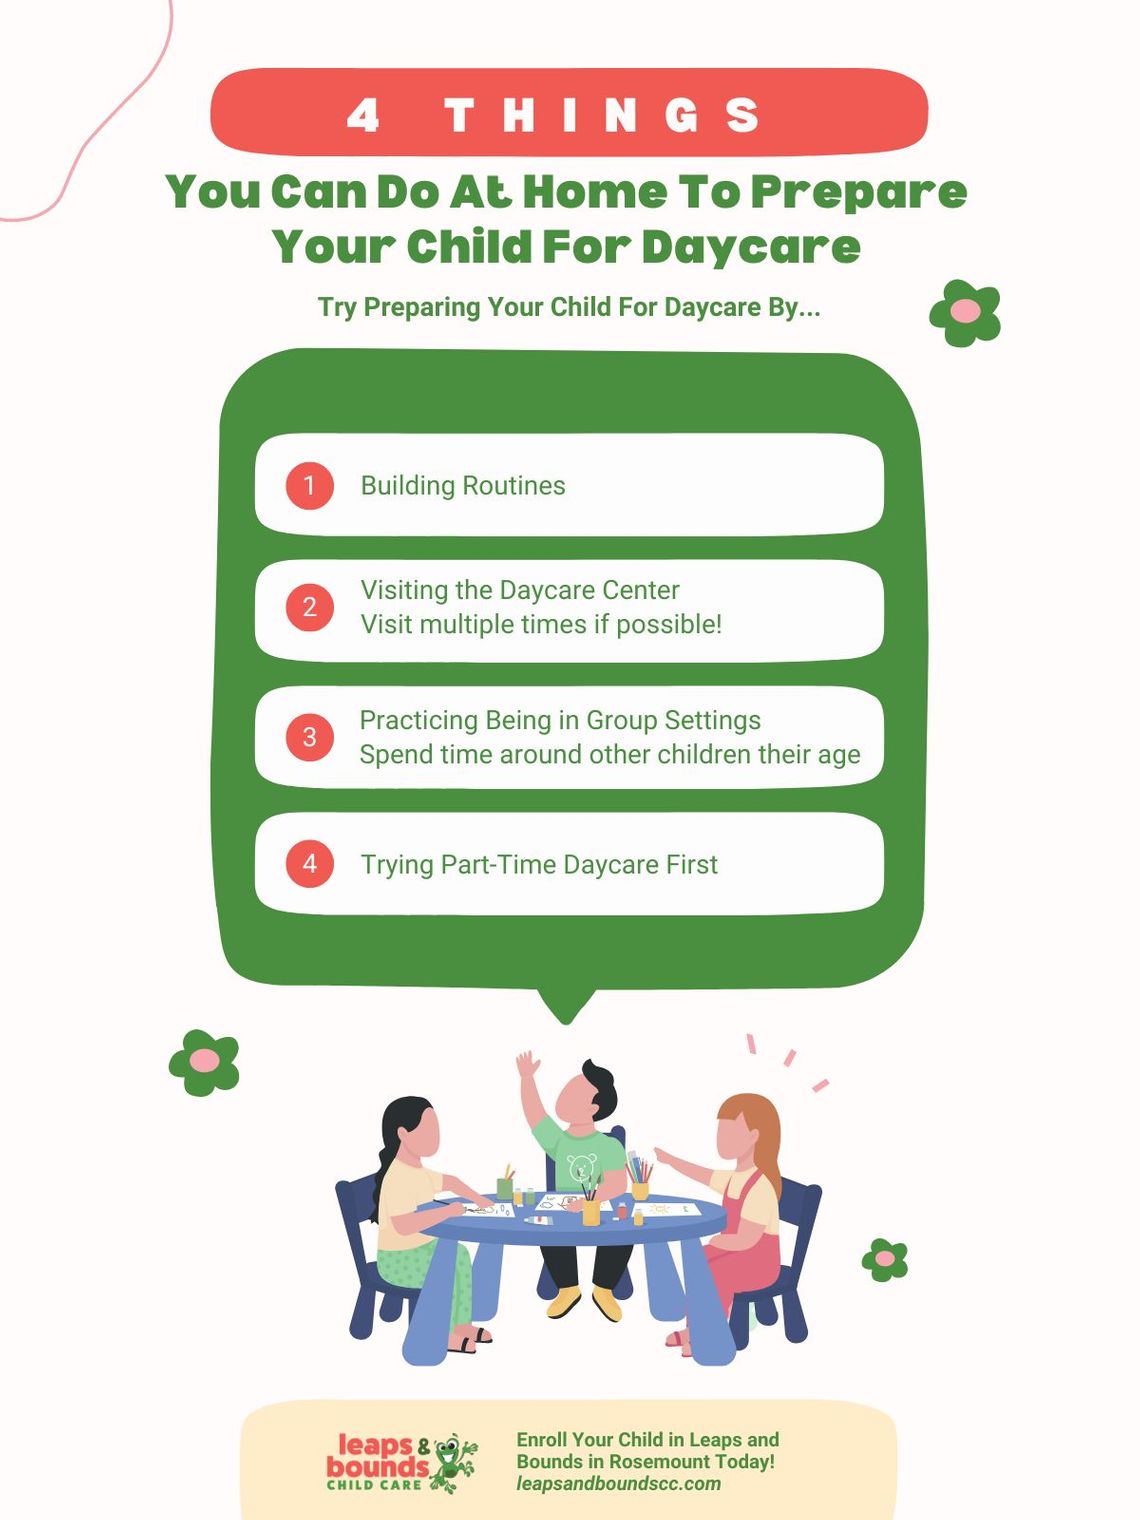 M24720-Infographic-4-Things-You-Can-Do-At-Home-To-Prepare-Your-Child-For-Daycare-62def00a7caf5.jpeg